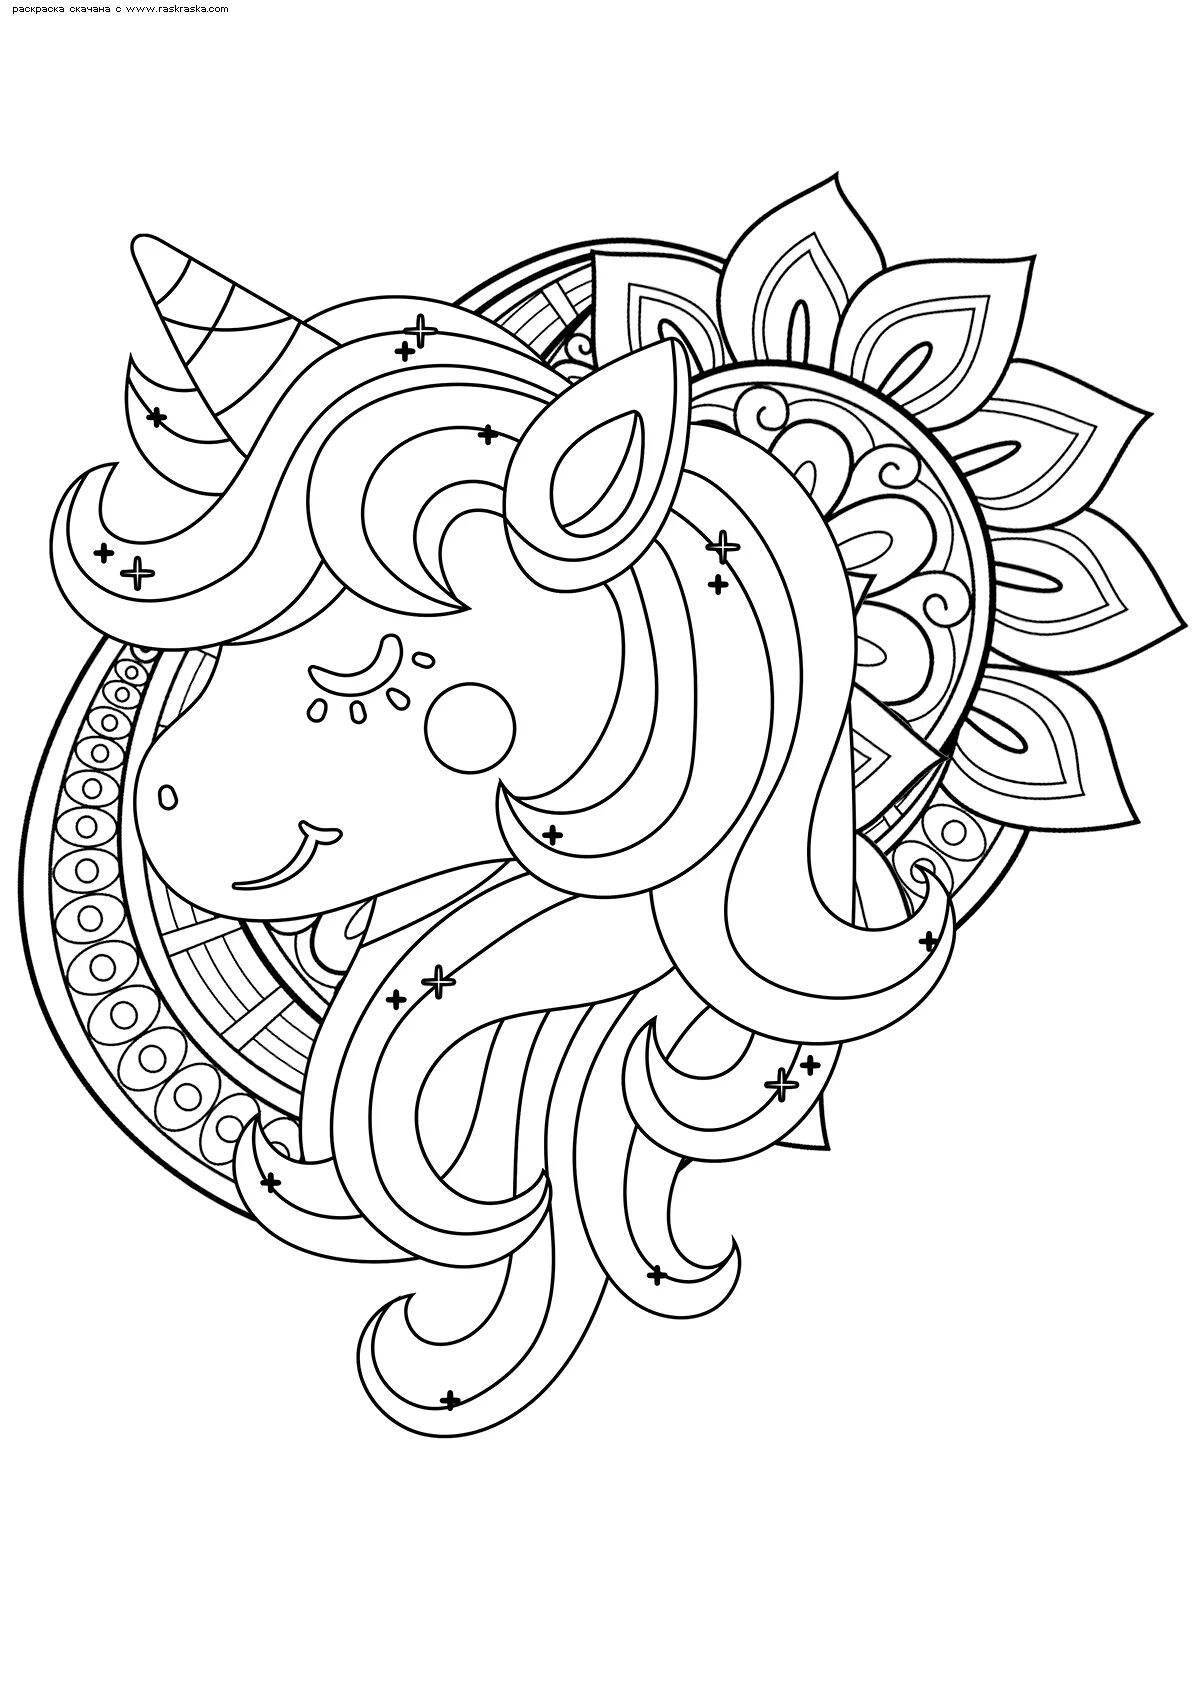 Tempting unicorn antistress coloring book for kids